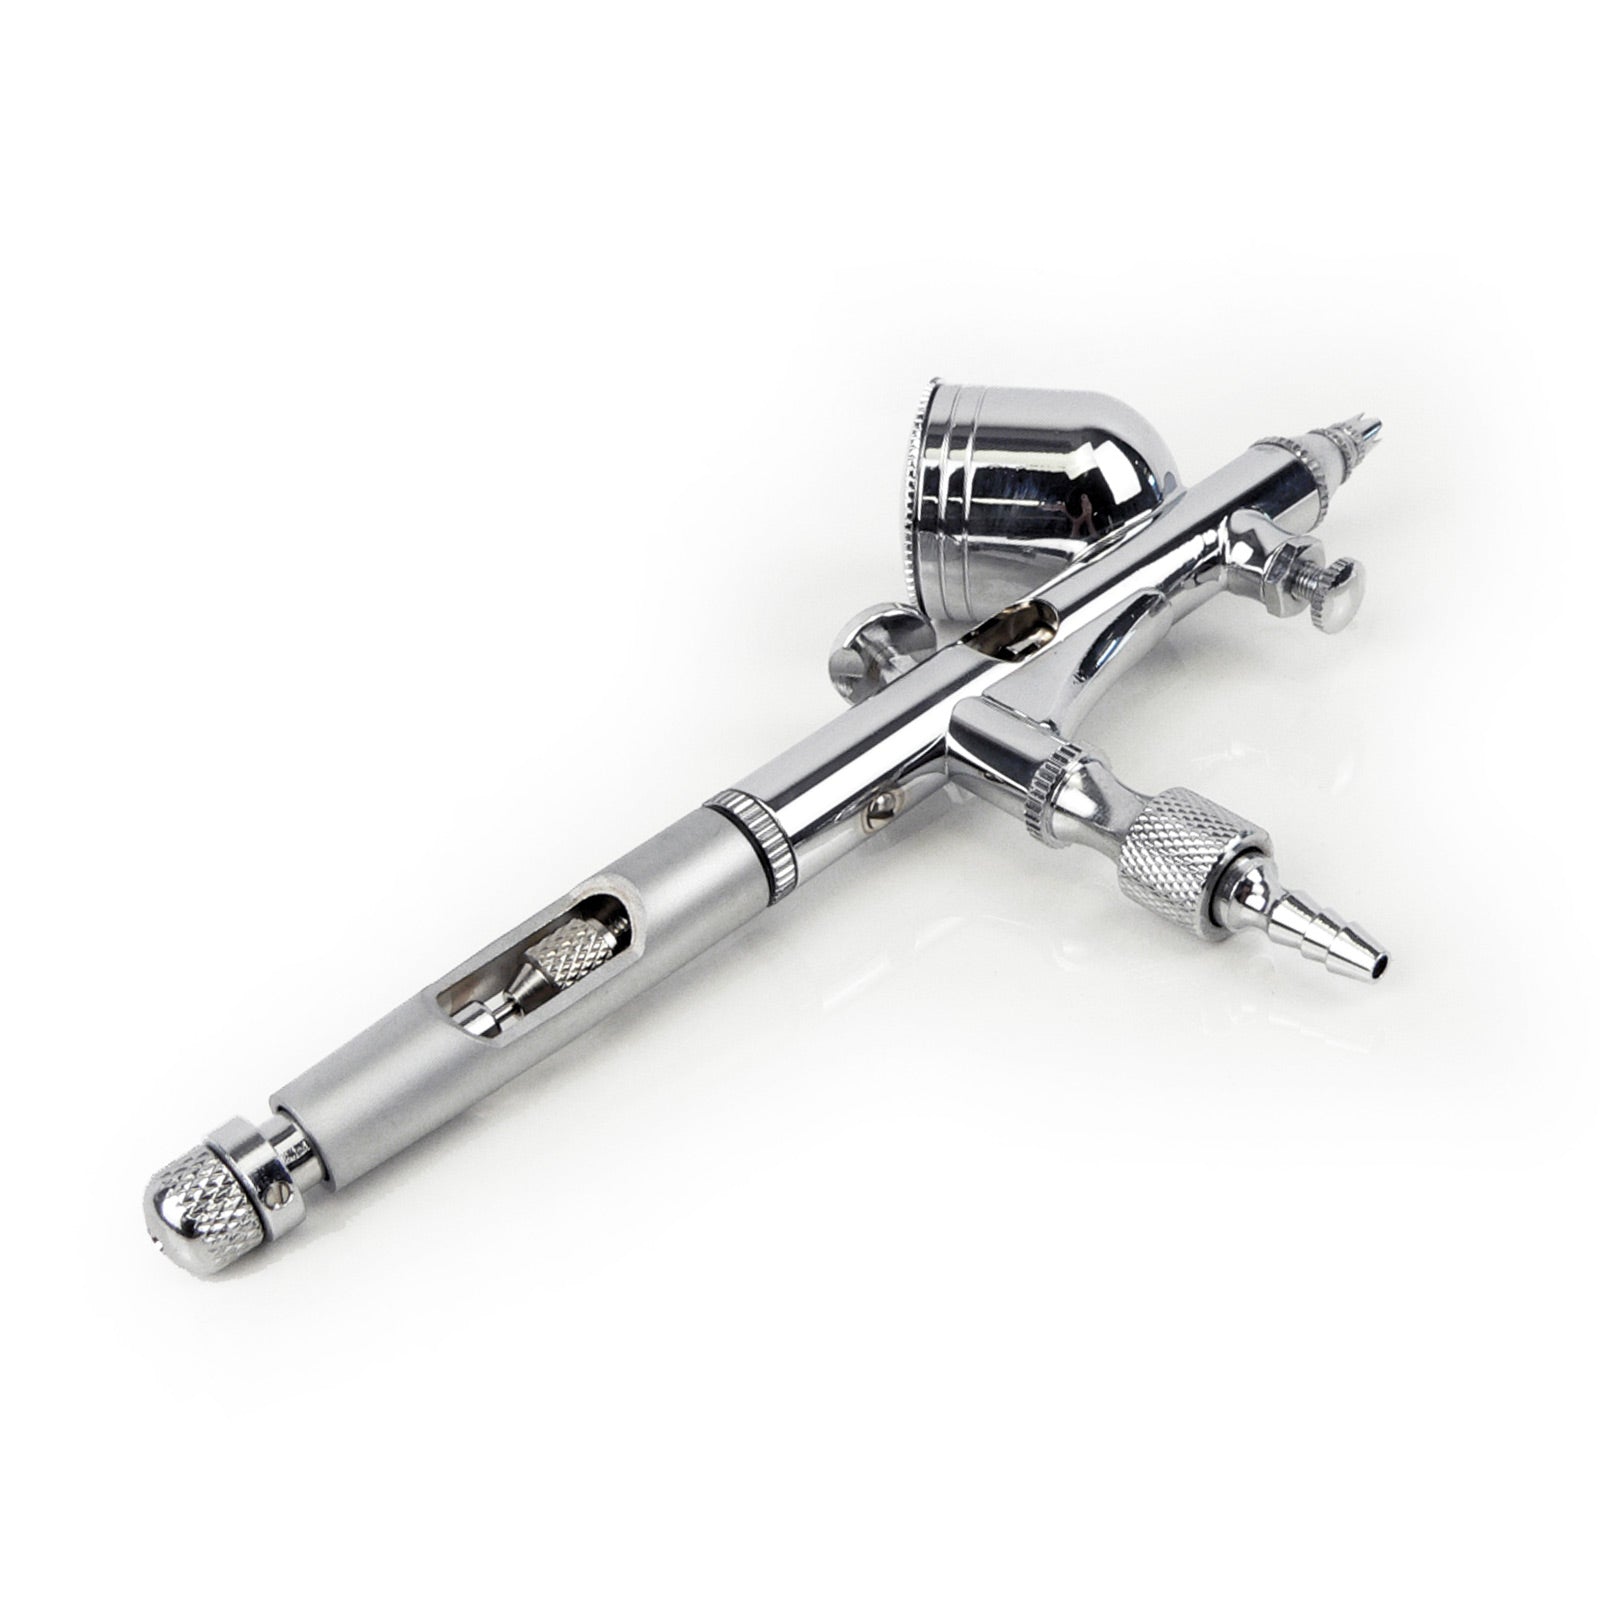 9cc Cup Dual Action Air Brush